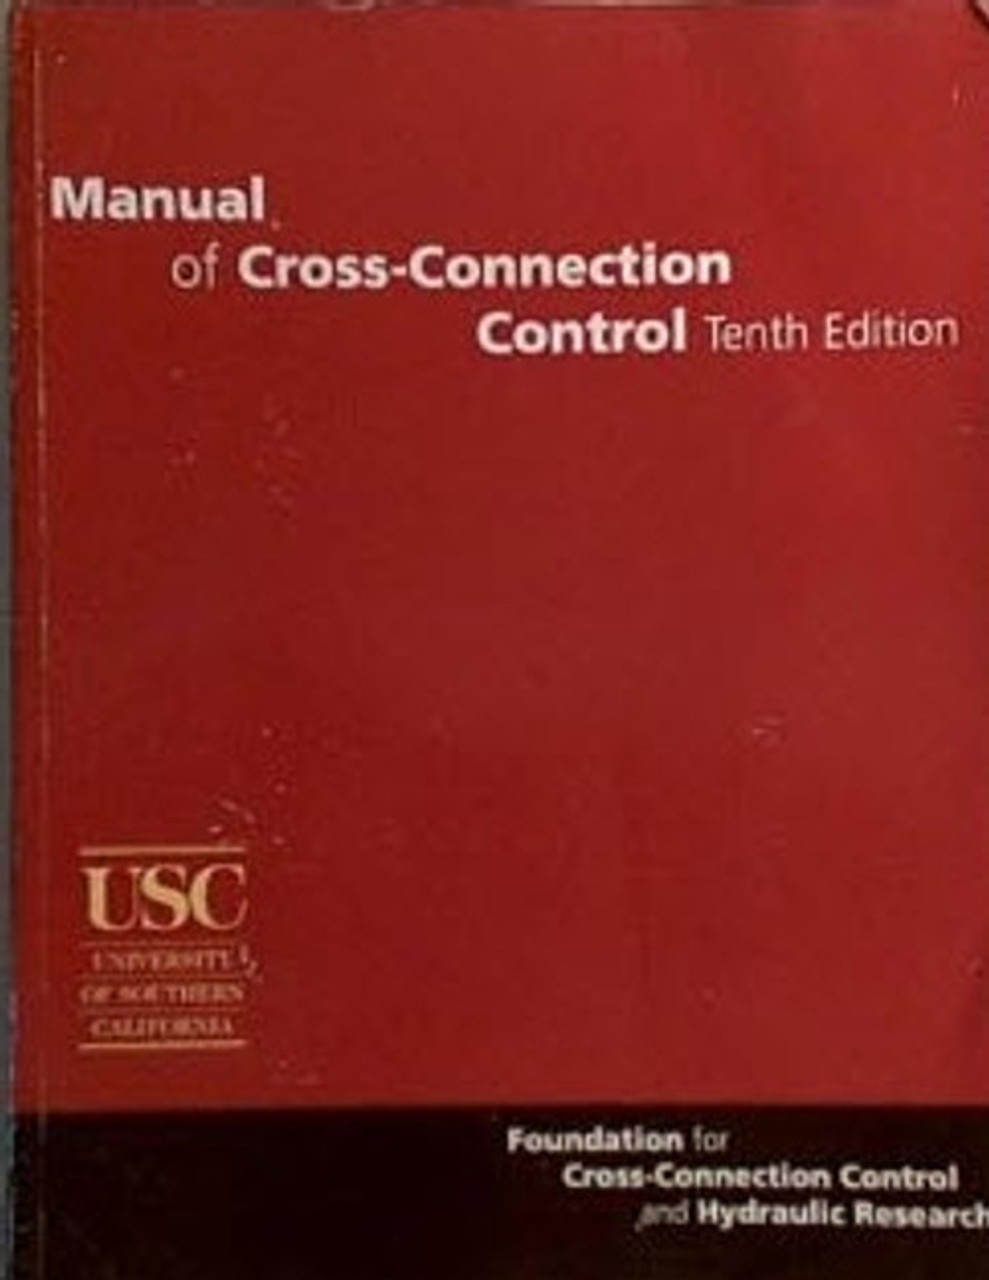 Manual of Cross-Connection Control, 2009, 10th edition,